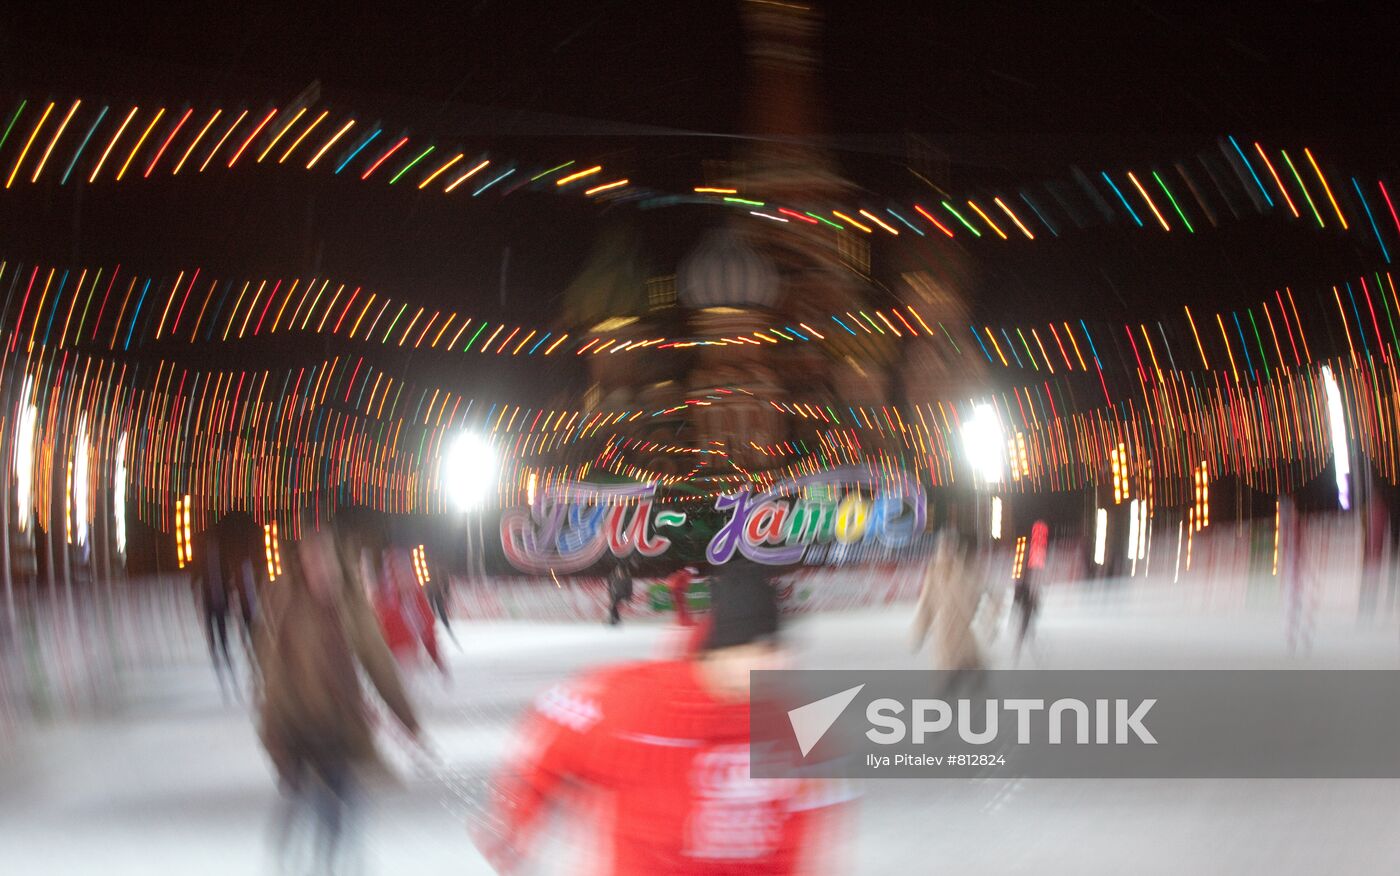 Opening of ice rink on Red Square